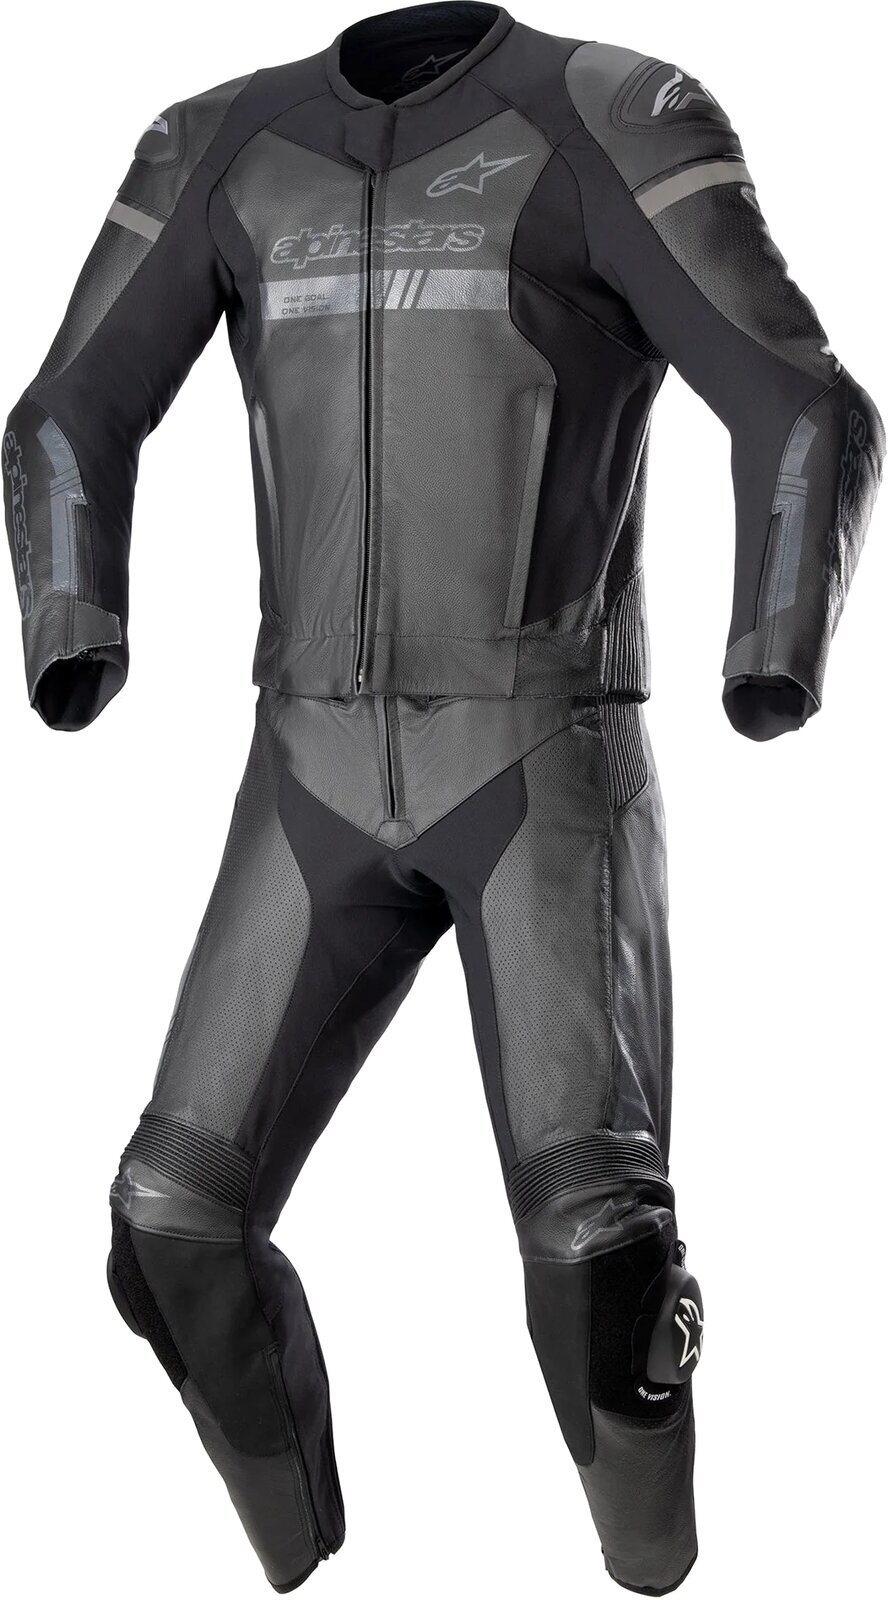 Two-piece Motorcycle Suit Alpinestars GP Force Chaser Leather Suit 2 Pc Black/Black 54 Two-piece Motorcycle Suit